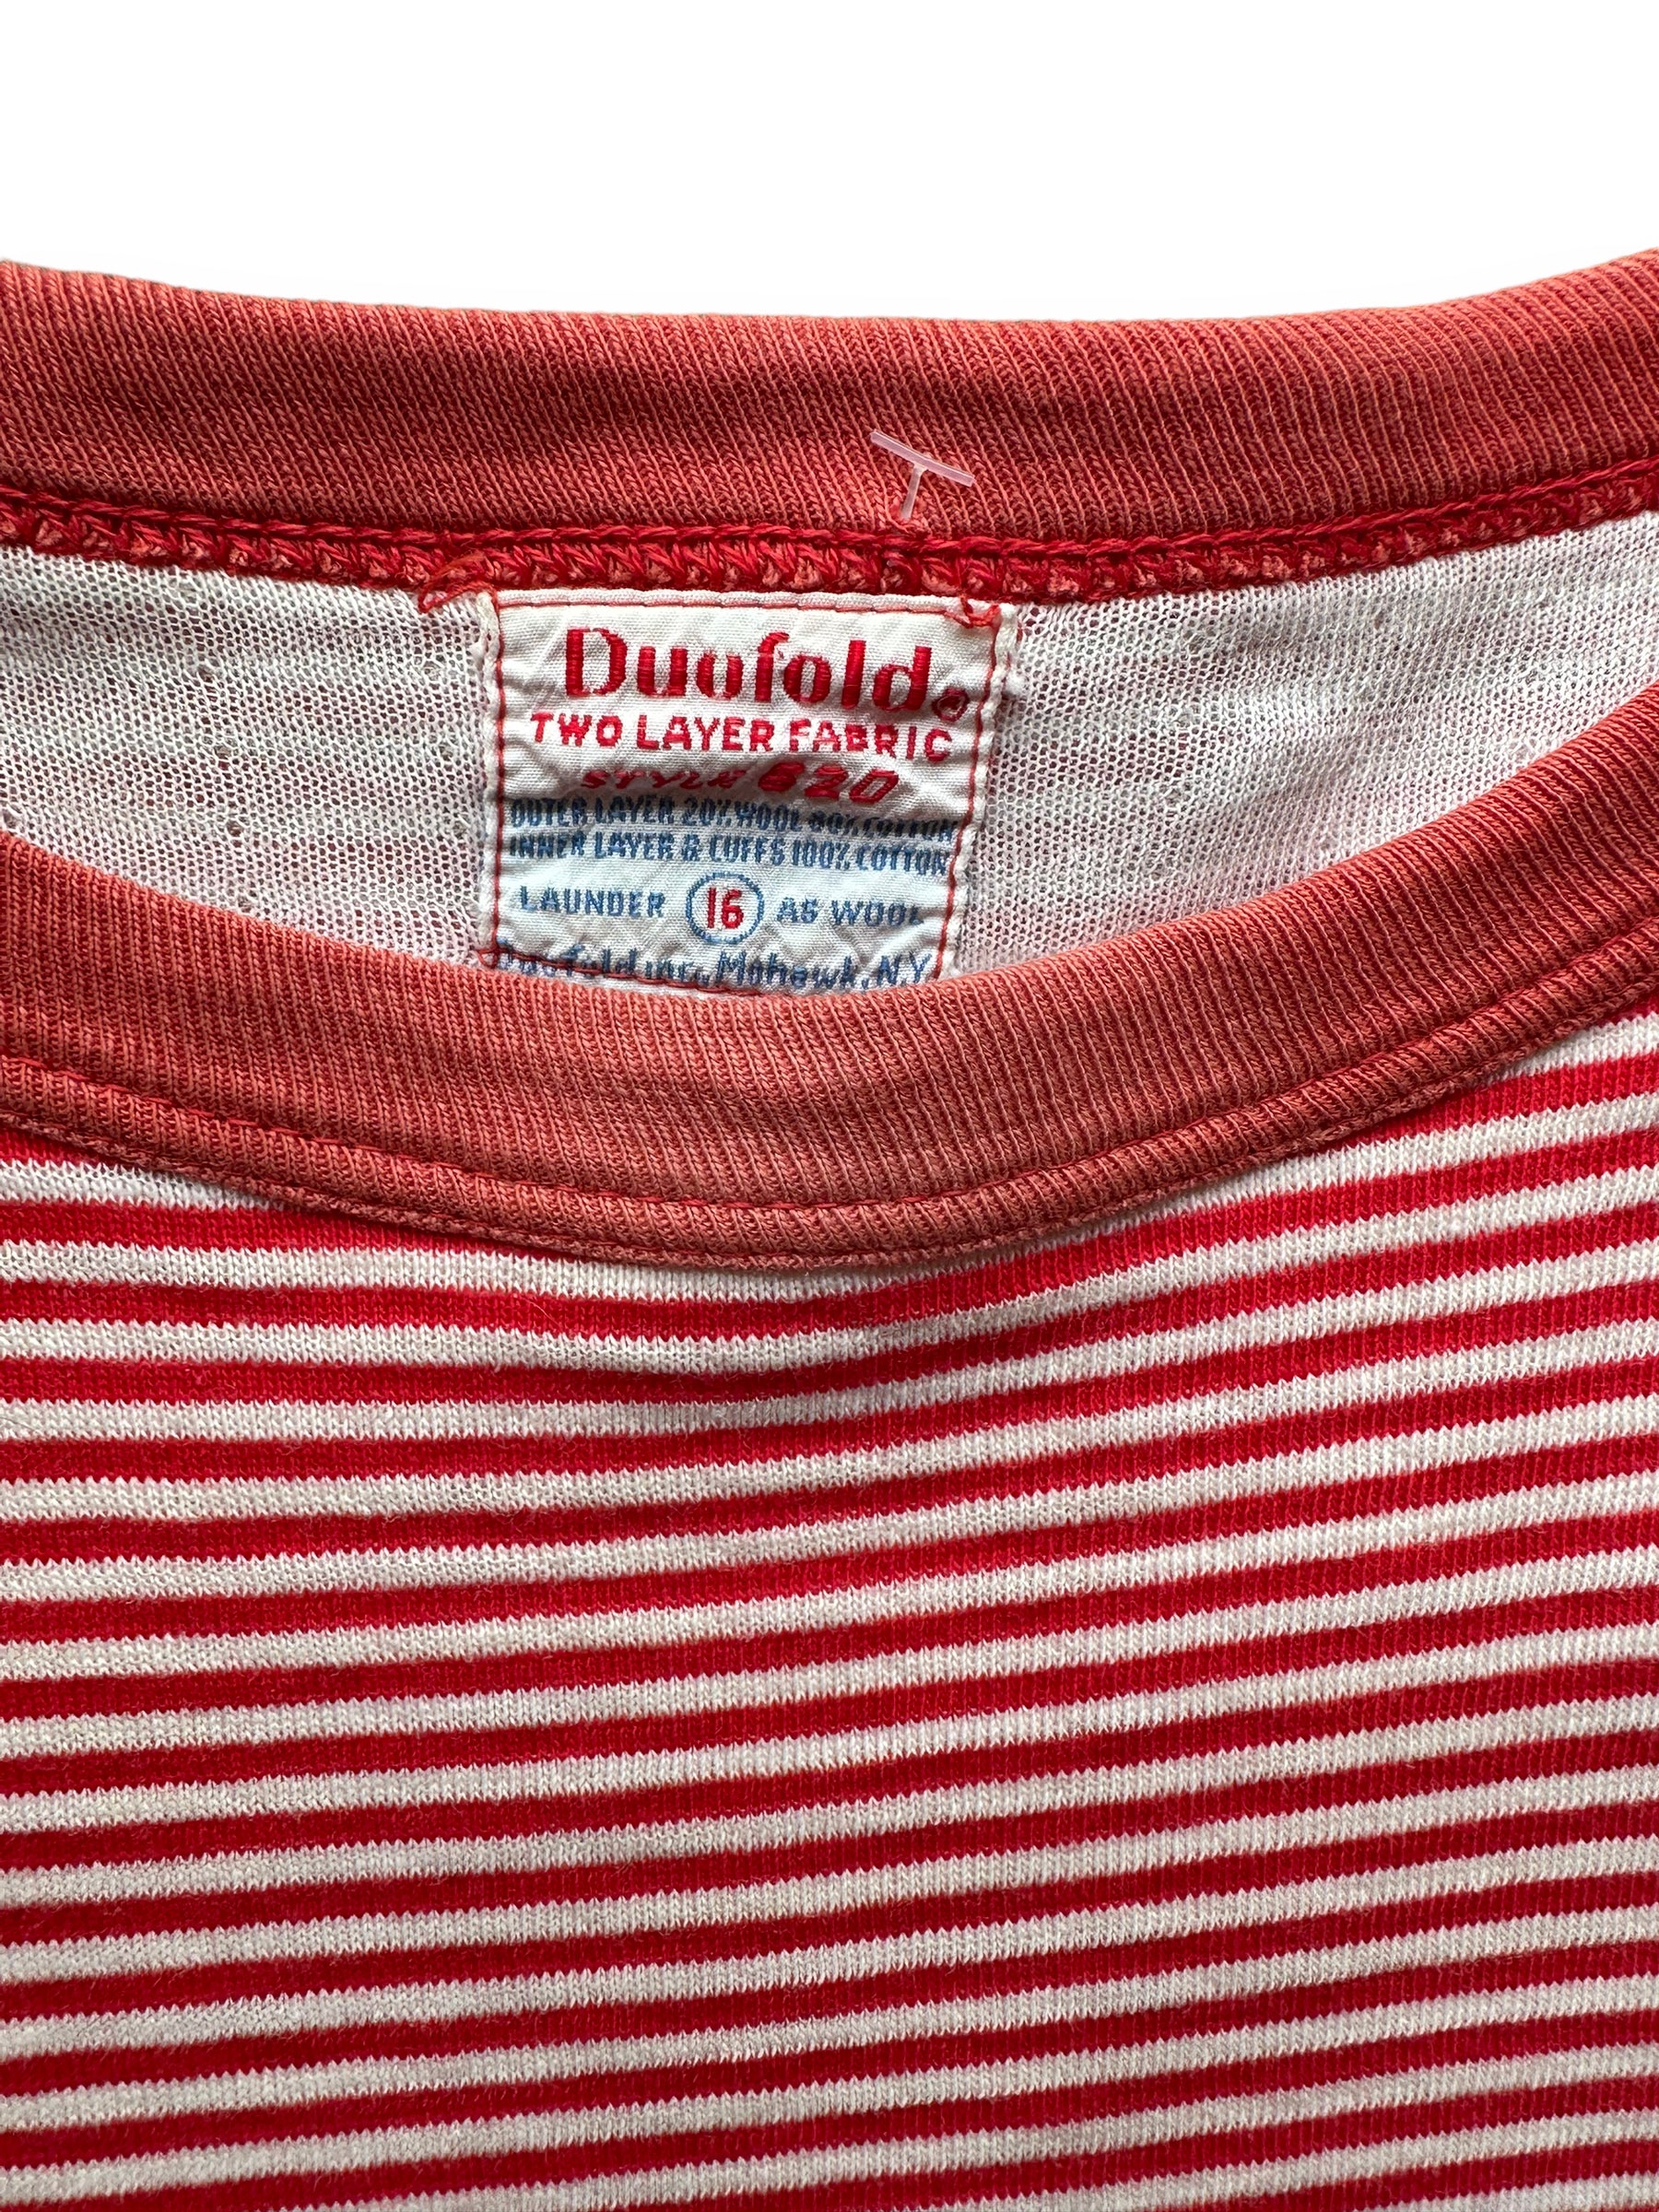 Tag View on Vintage Duofold Striped Thermal Top SZ M | Vintage Thermal Underwear Seattle | Barn Owl Vintage Goods